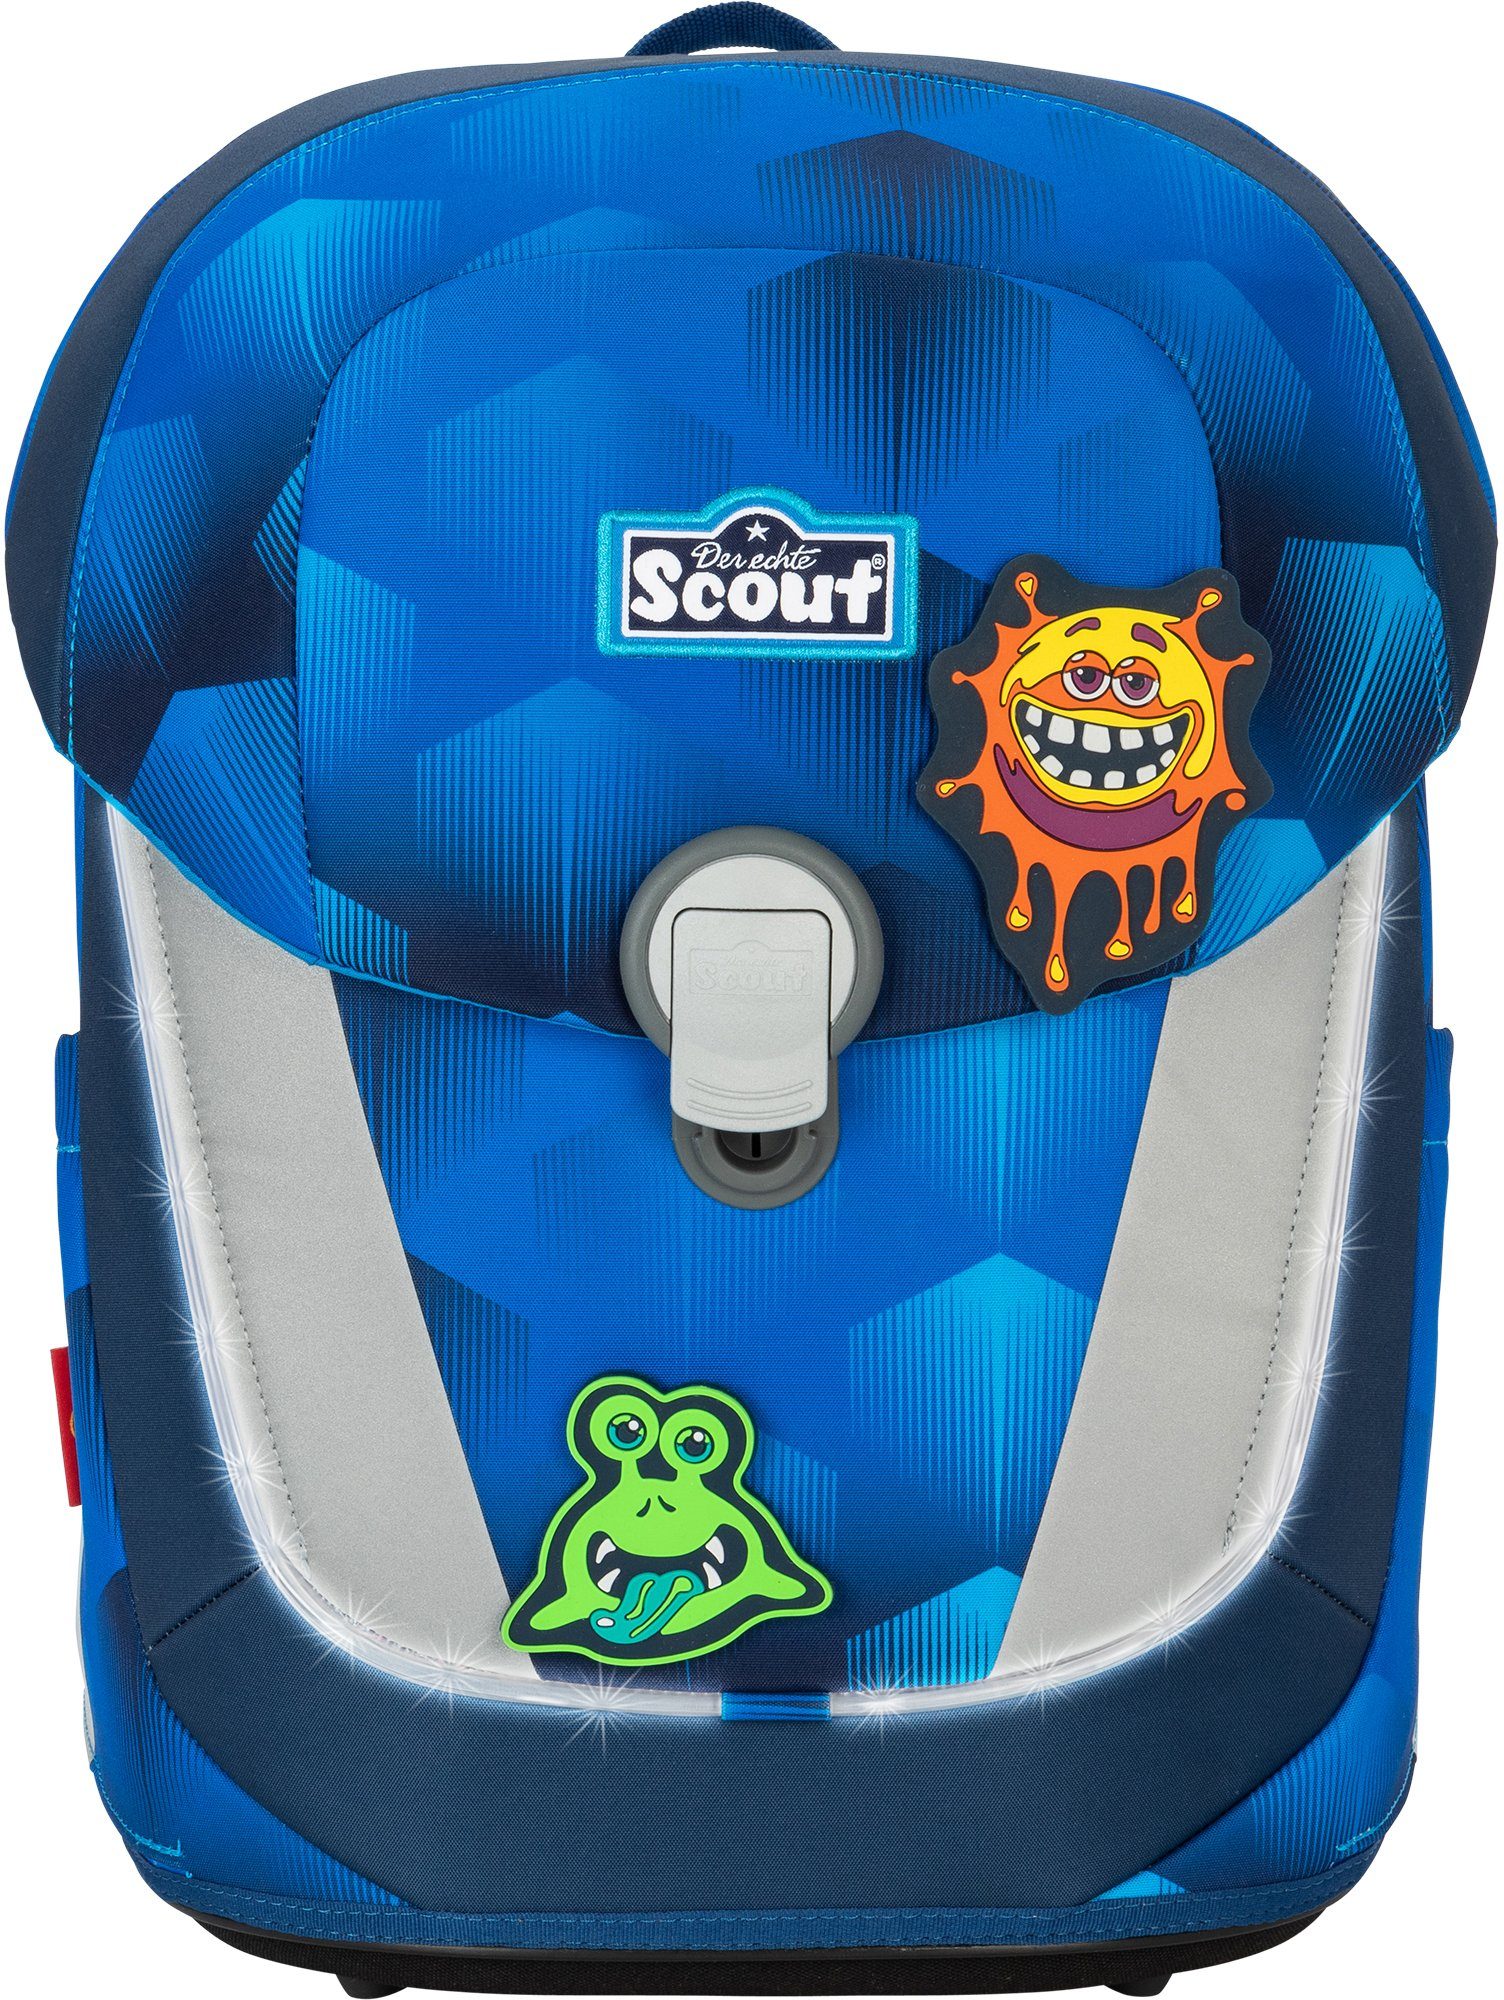 Sunny II enthält recyceltes Scout Snaps; 3 (Set), Light, & Funny LED-Licht Material Funny Schulranzen mit Freaks Safety